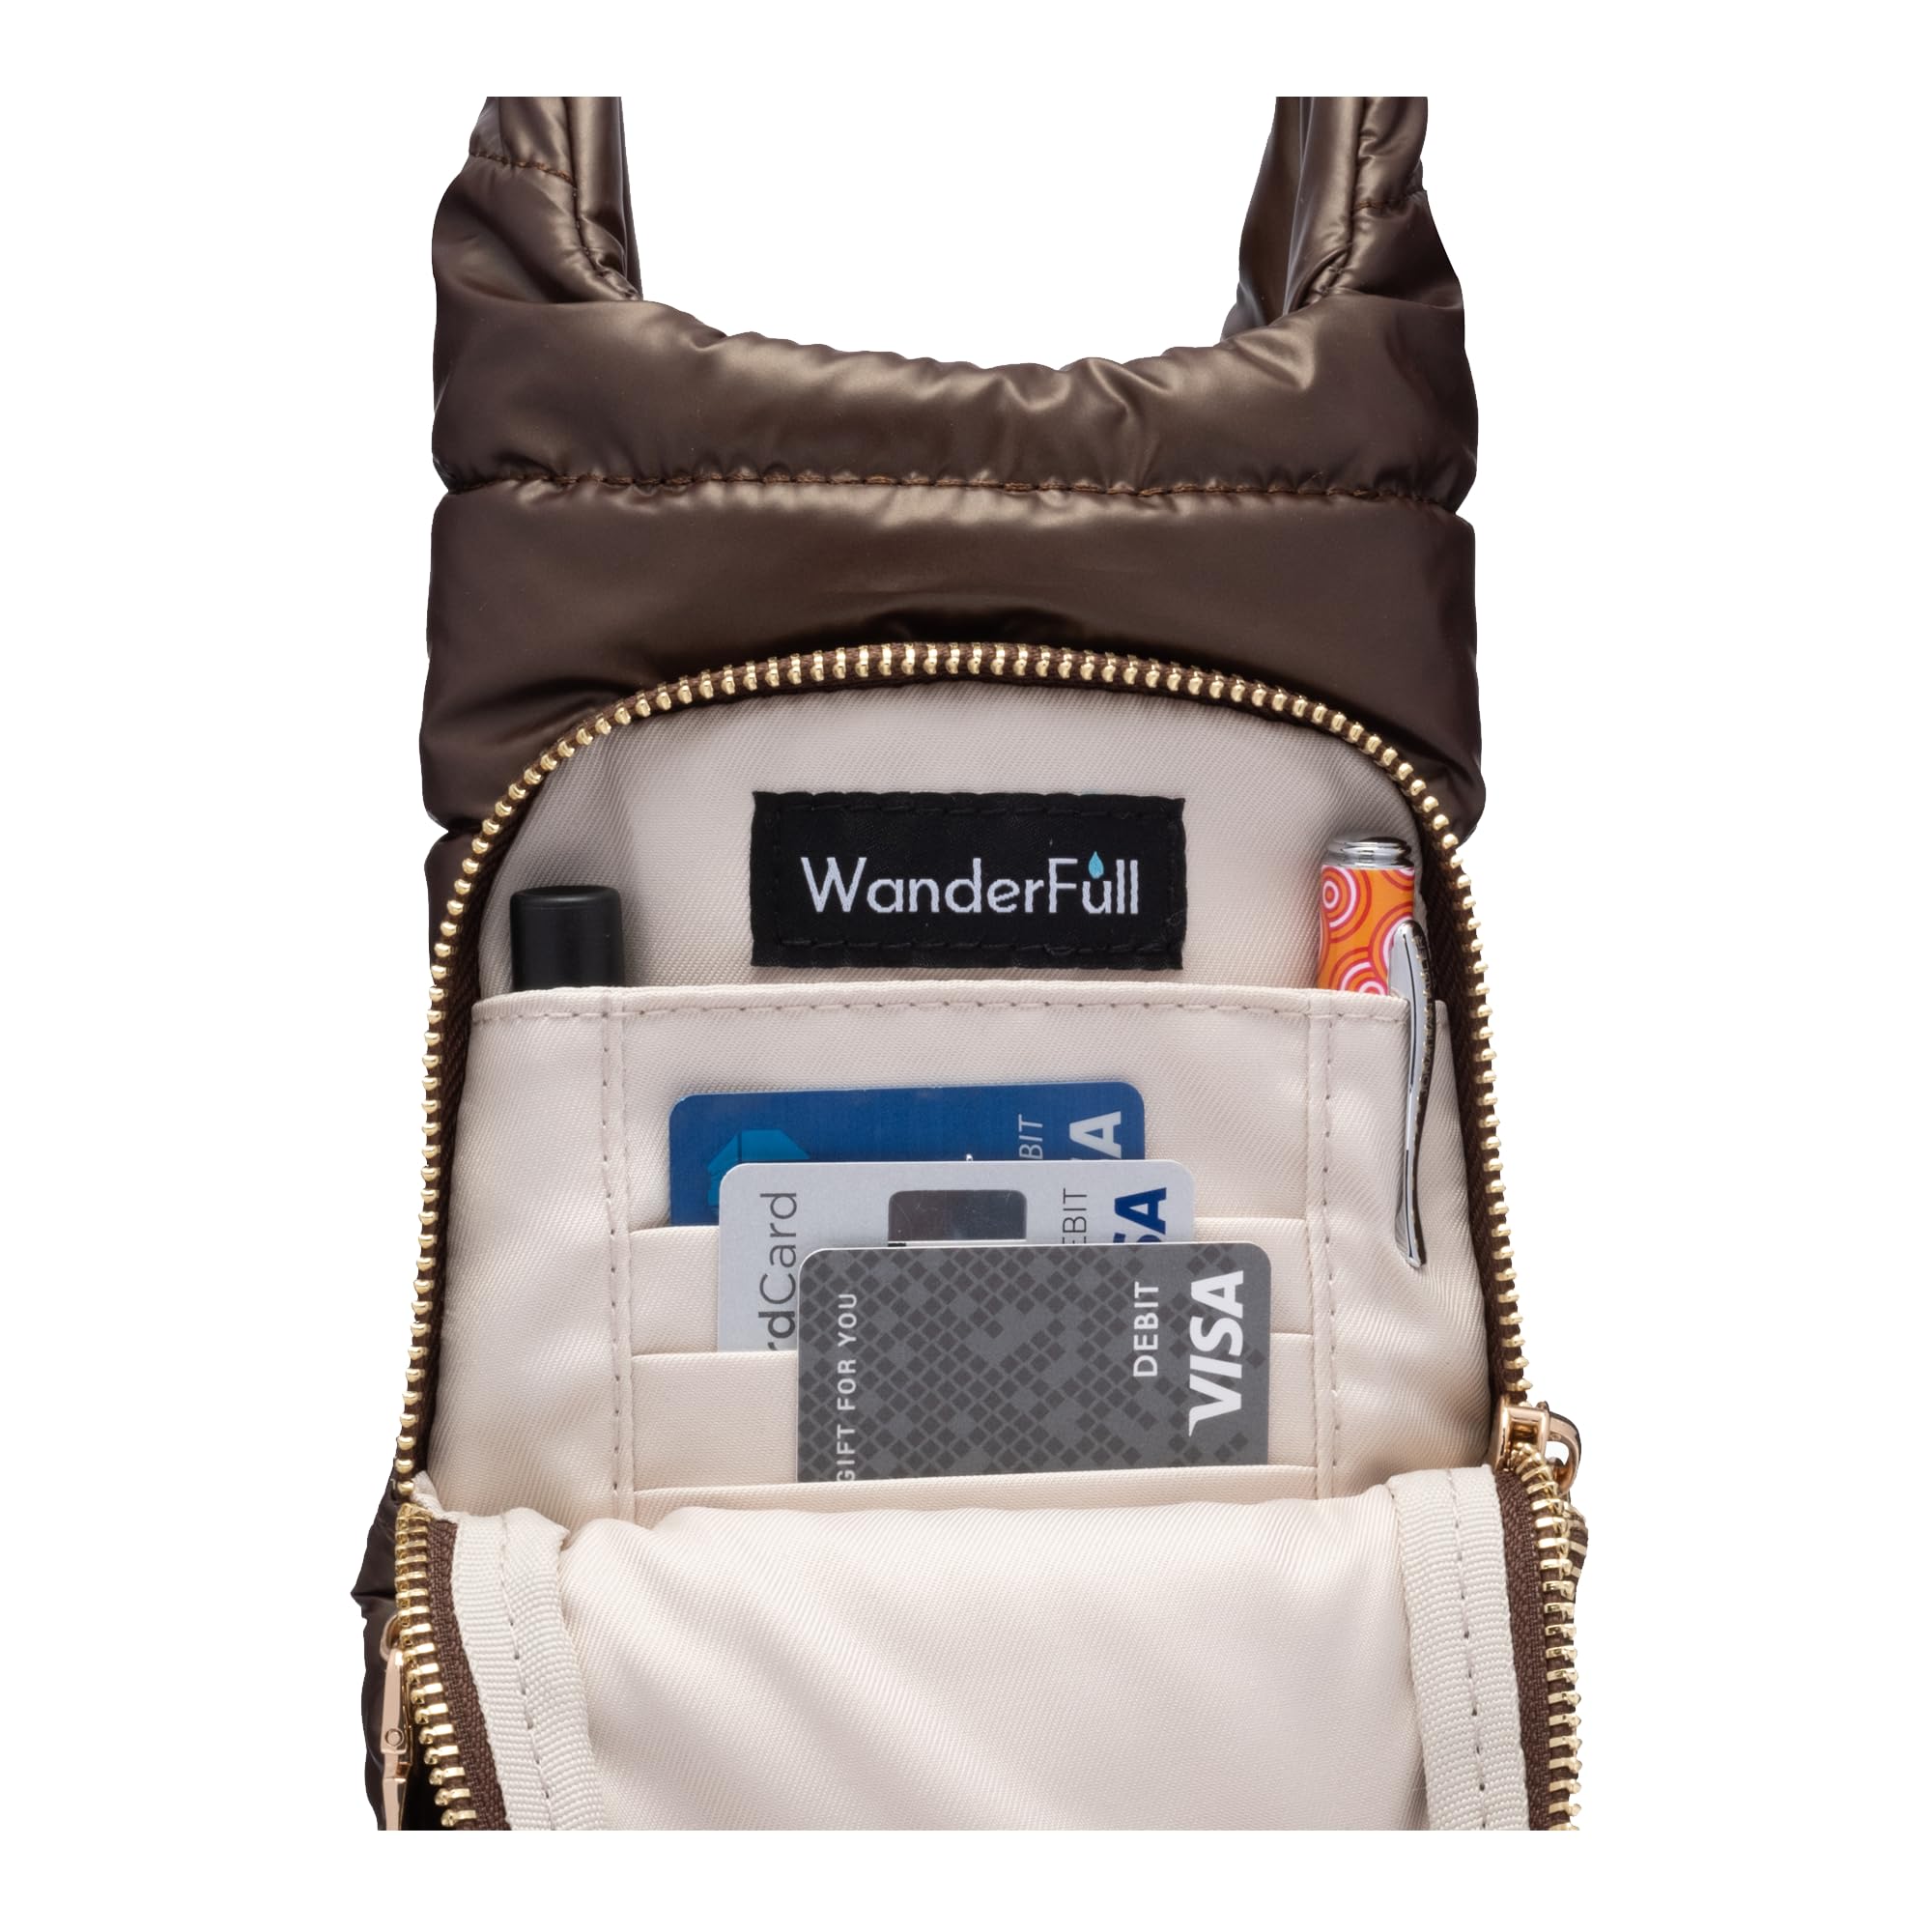 WanderFull Original Crossbody HydroBag | Quilted Water Bottle Carrier | Puffer Tote Tumbler Holder with Pockets for Phone & Accessories | Carry Travel Essentials (Chocolate Brown Shiny/Solid Strap)